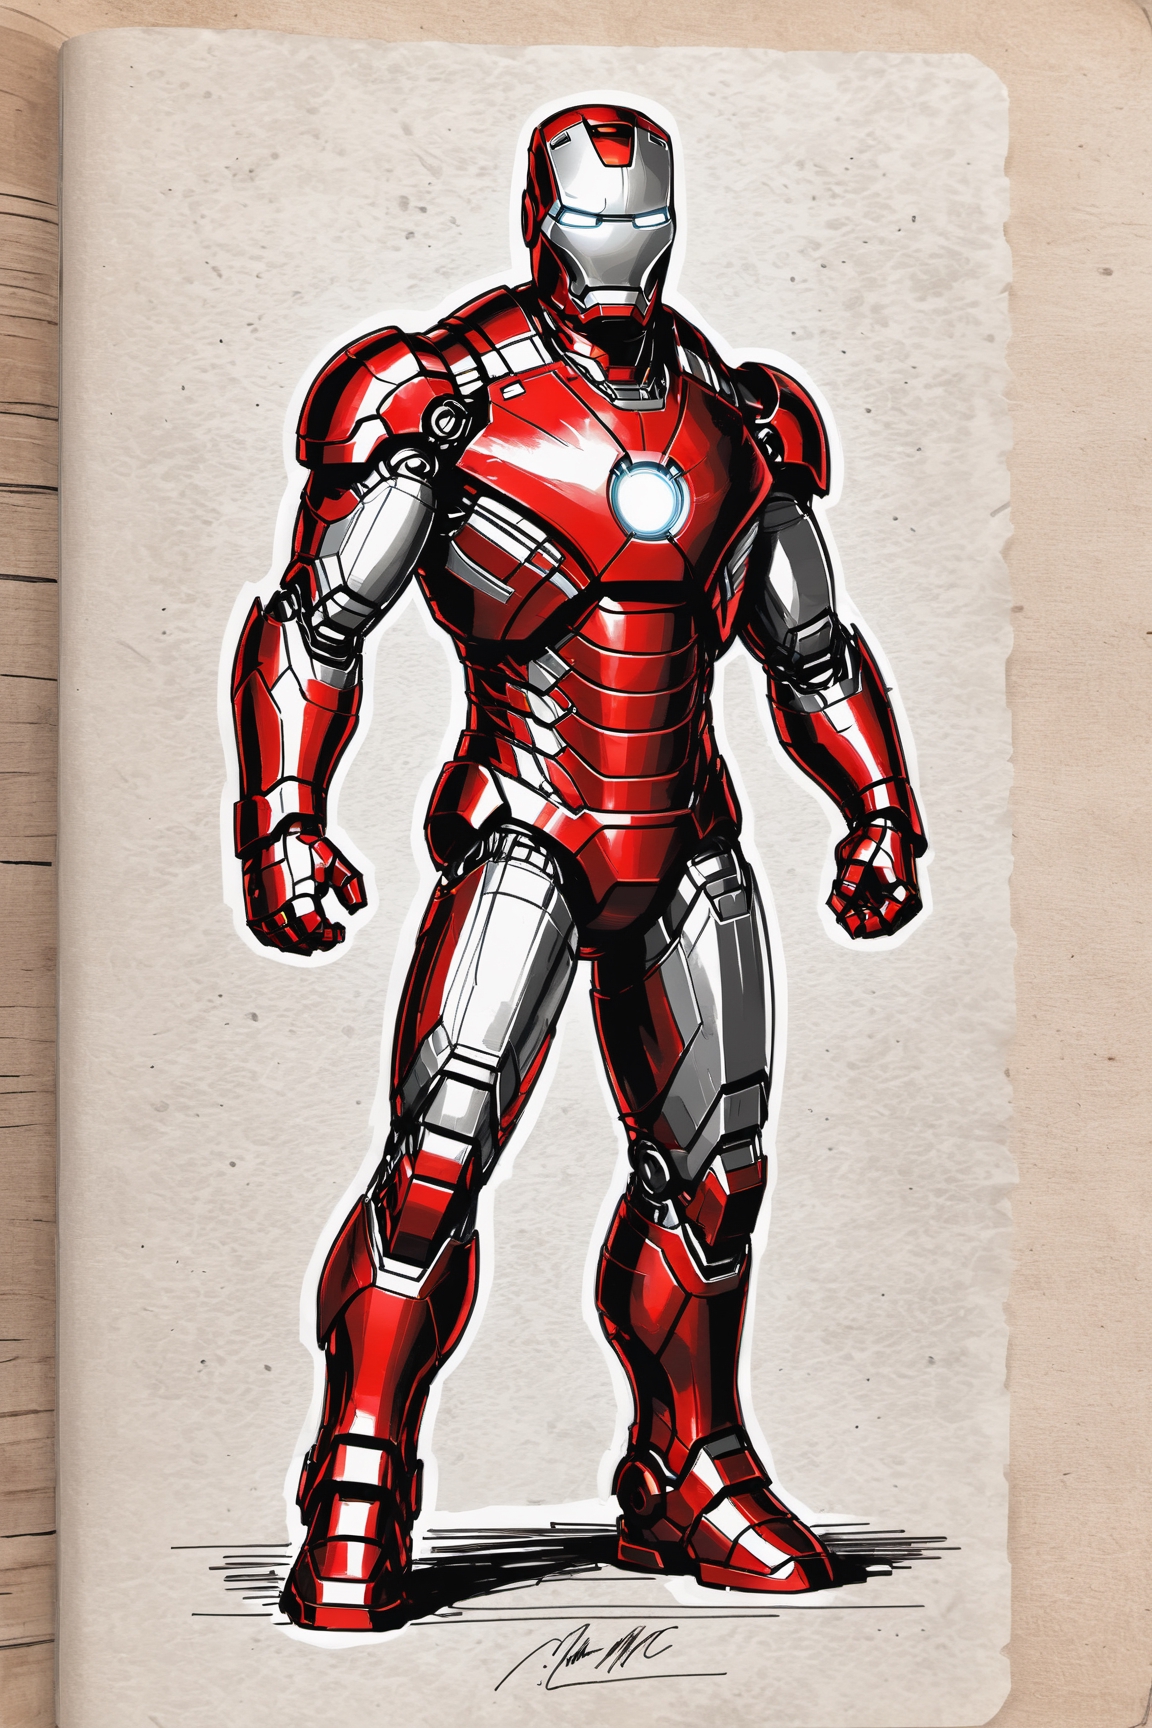 How To Draw Iron Man: 10 Step by Step Examples - Bored Art